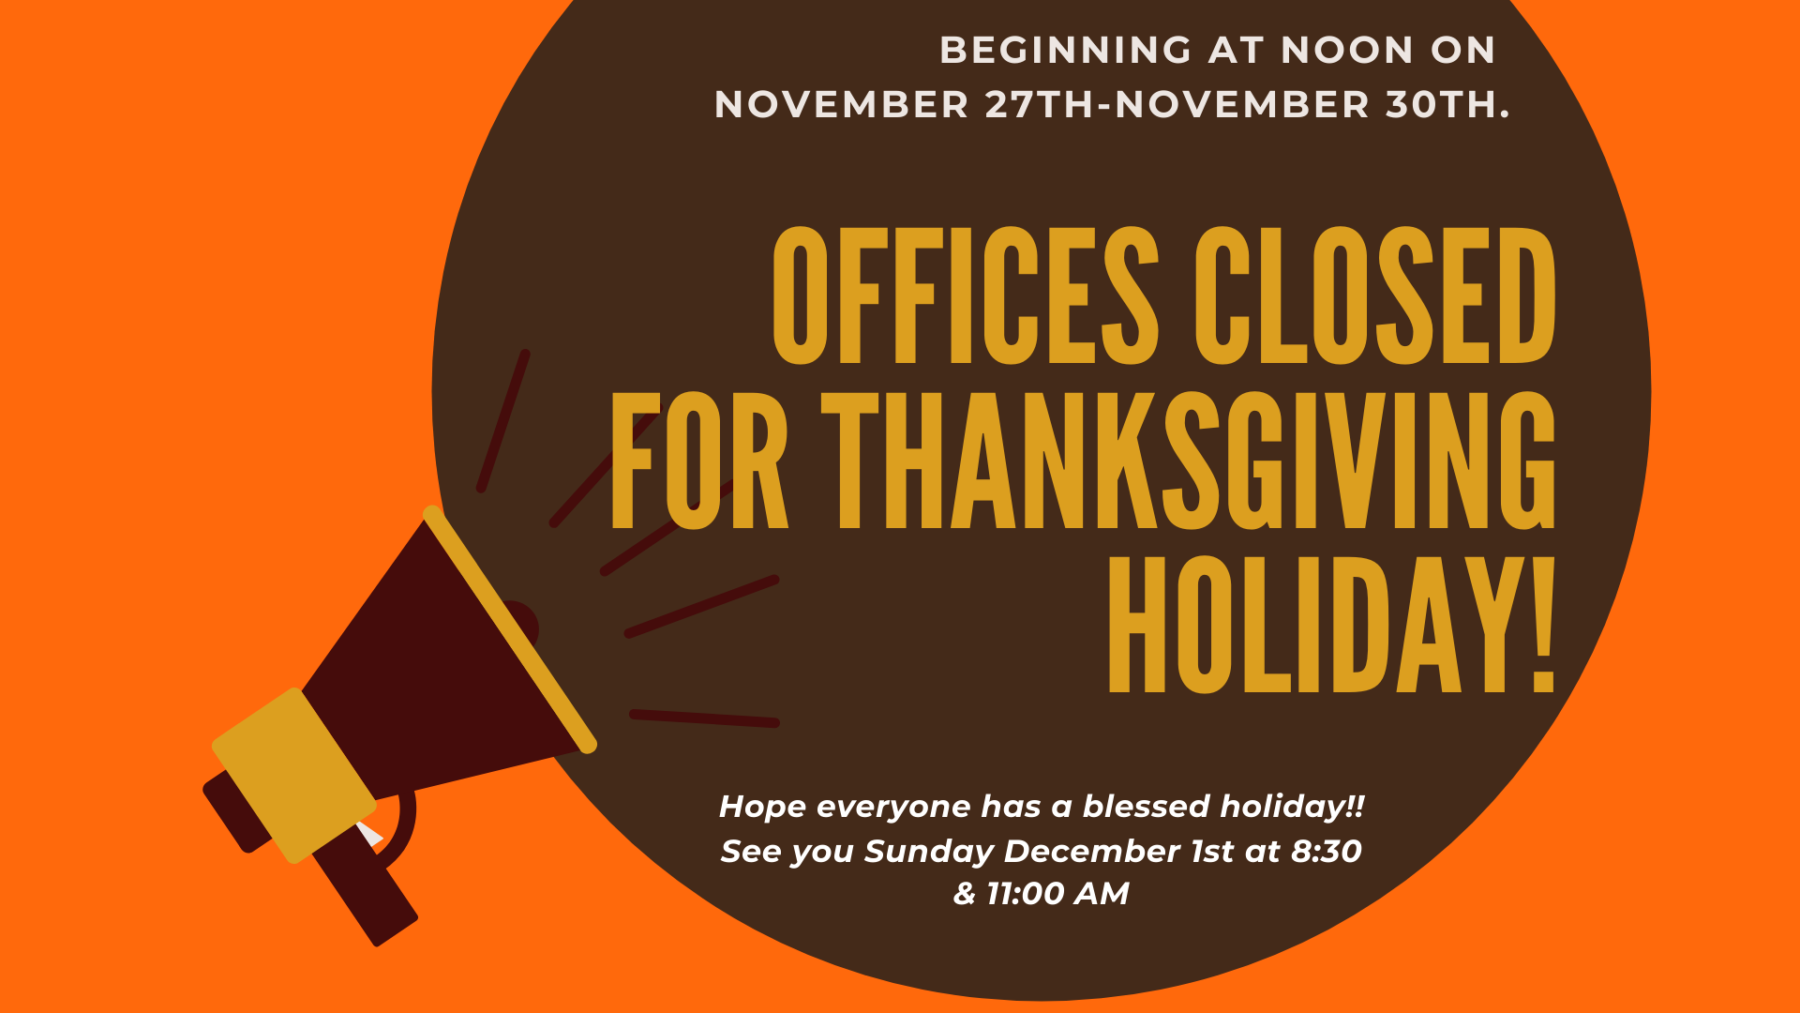 Offices closed for Thanksgiving